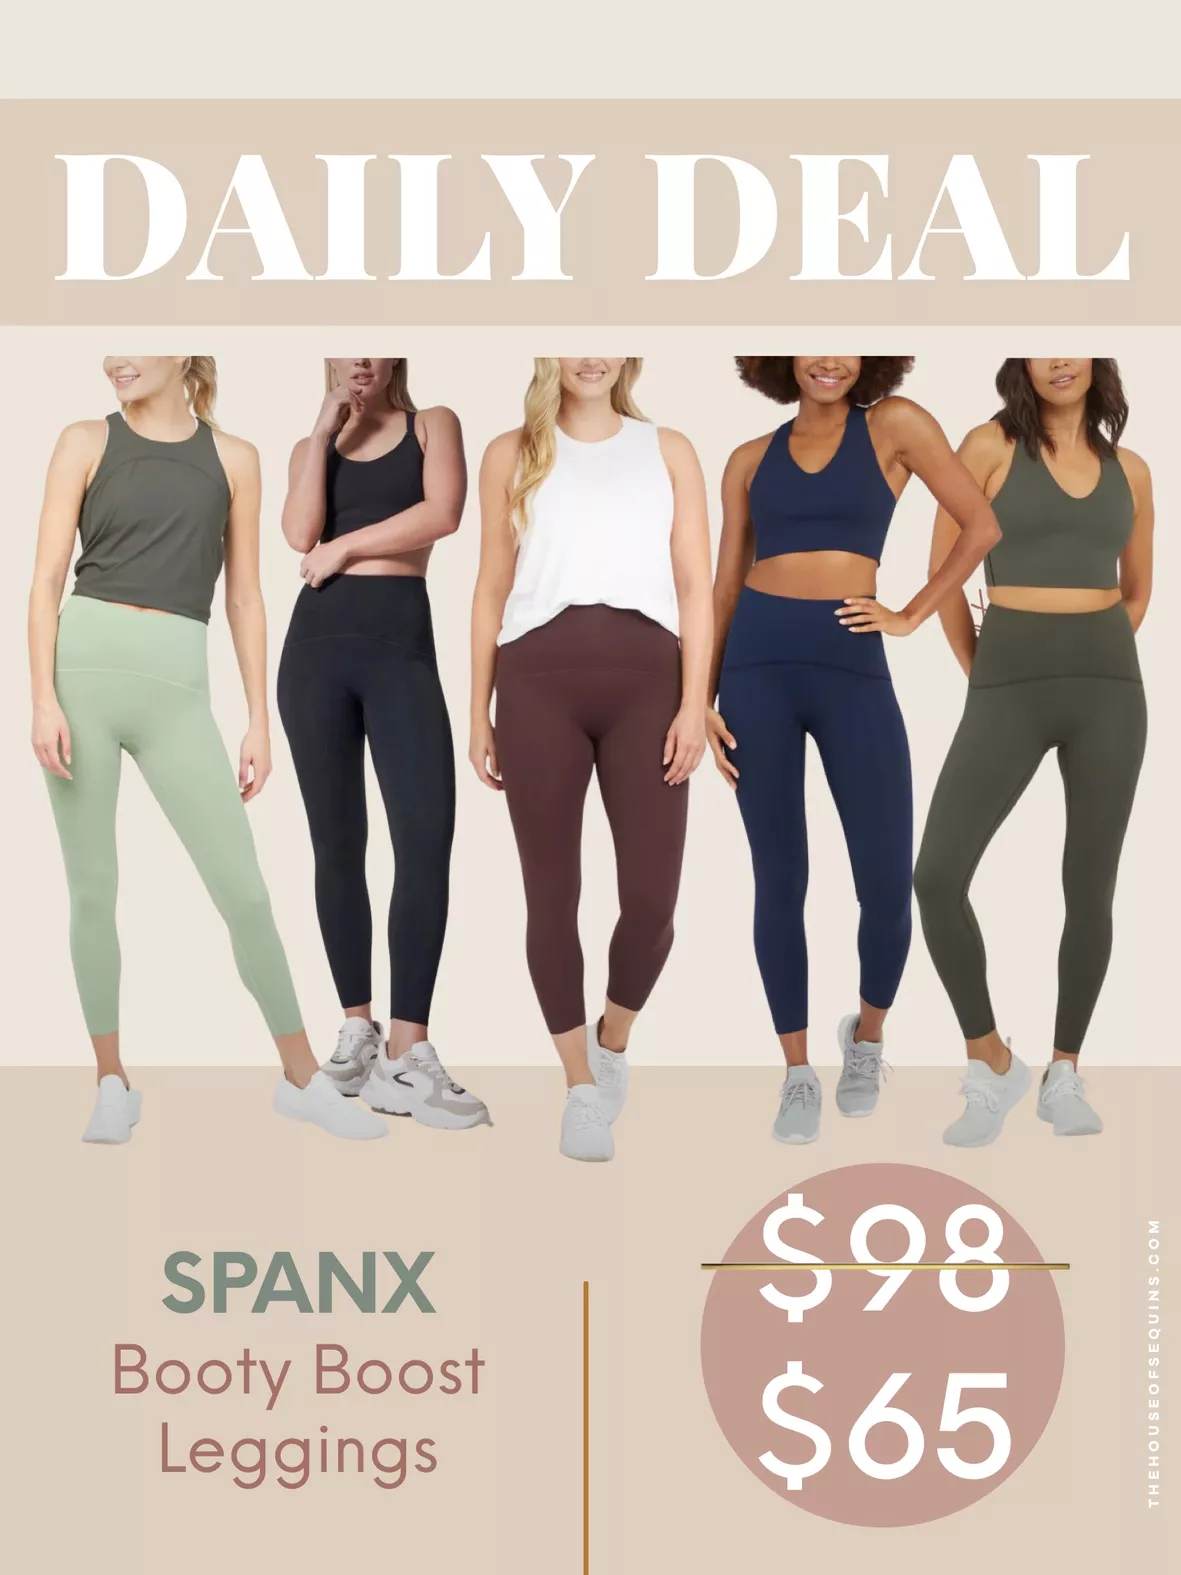 BOOTY BOOST BY SPANX